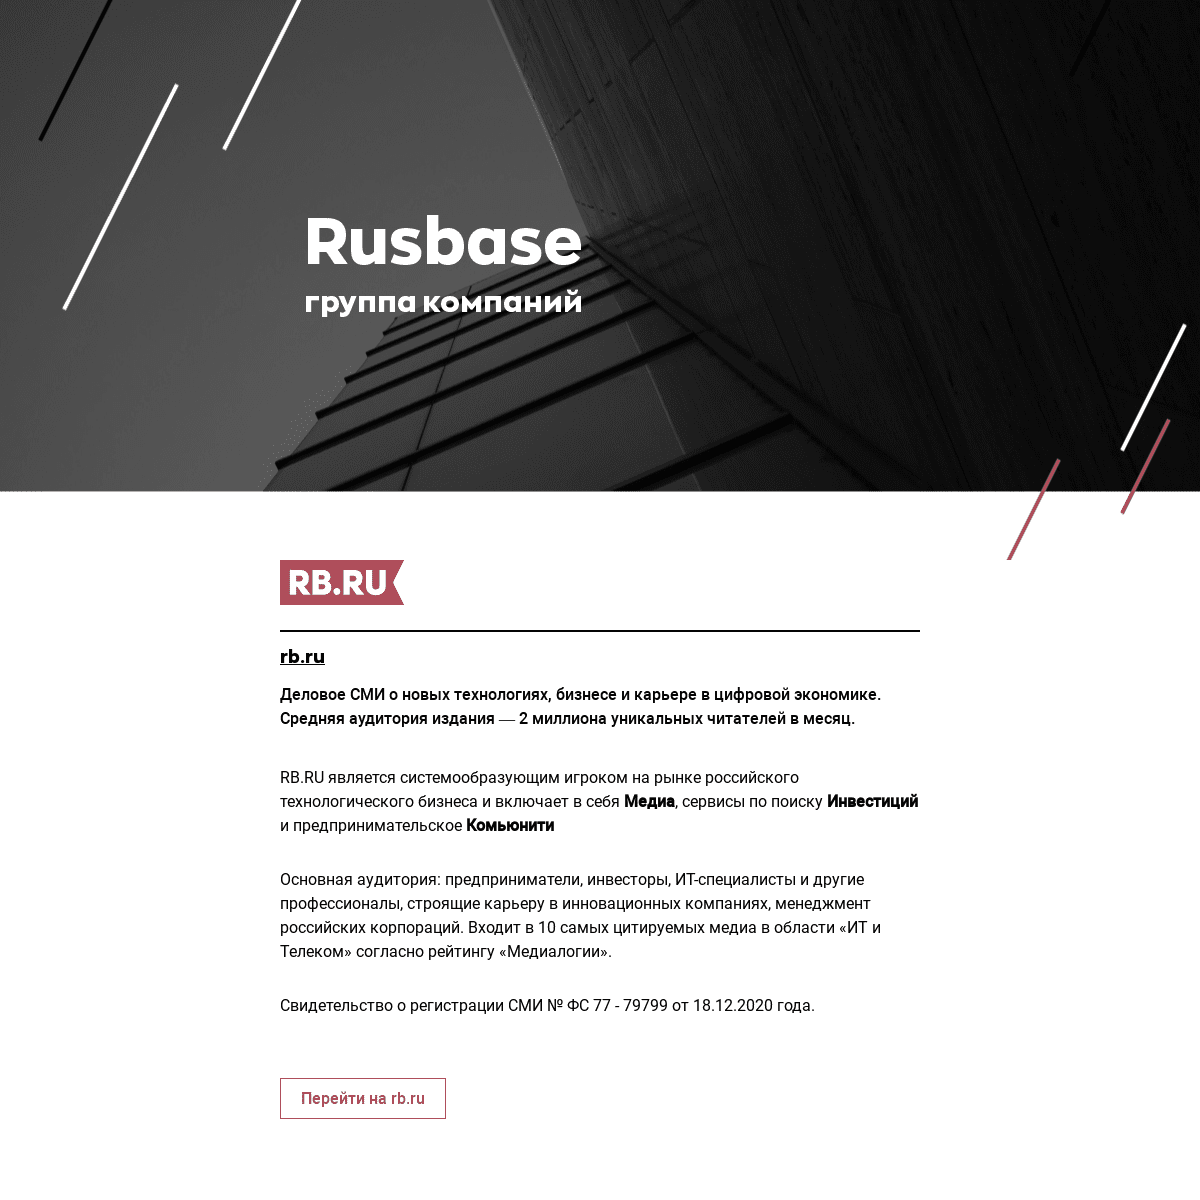 A complete backup of https://rusbase.com